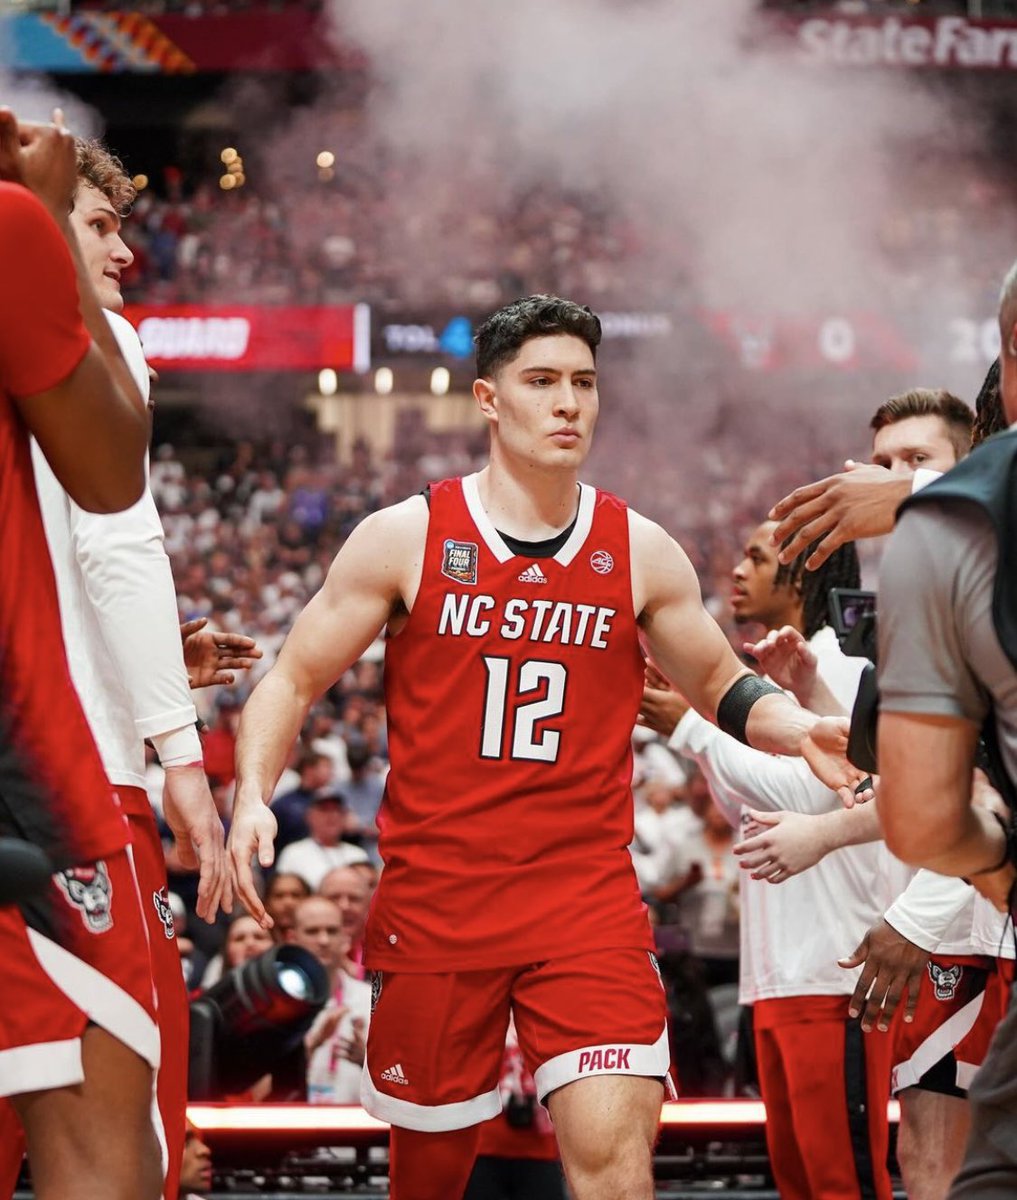 Unfinished Business - Announcing I will be using my final year of eligibility and returning to NC State with the goal to Run it Back to the Final Four and graduate with my MBA. #BackWithThePack @PackMensBball